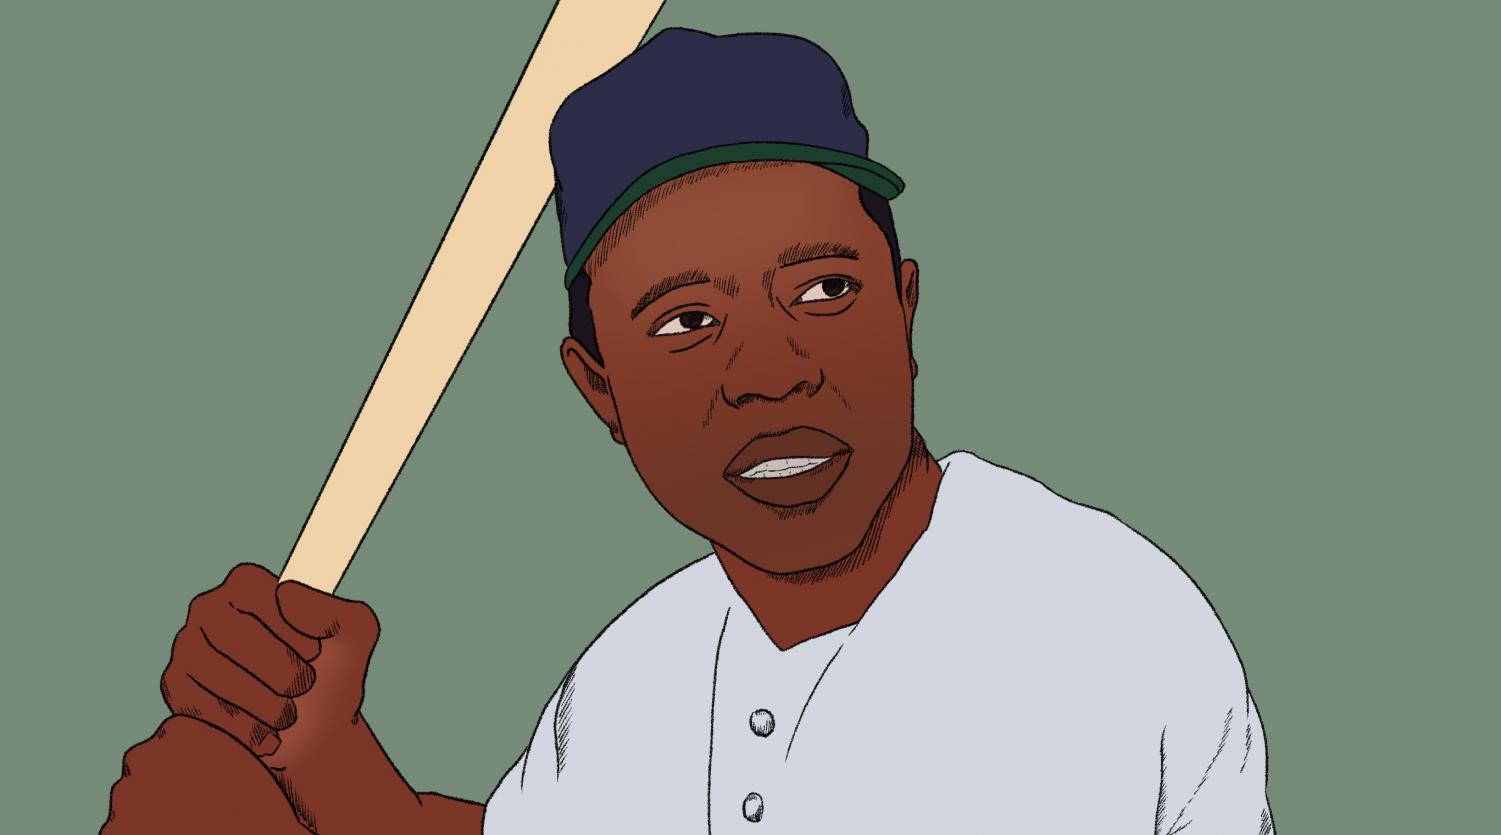 A look at Hank Aaron's career and accomplishments